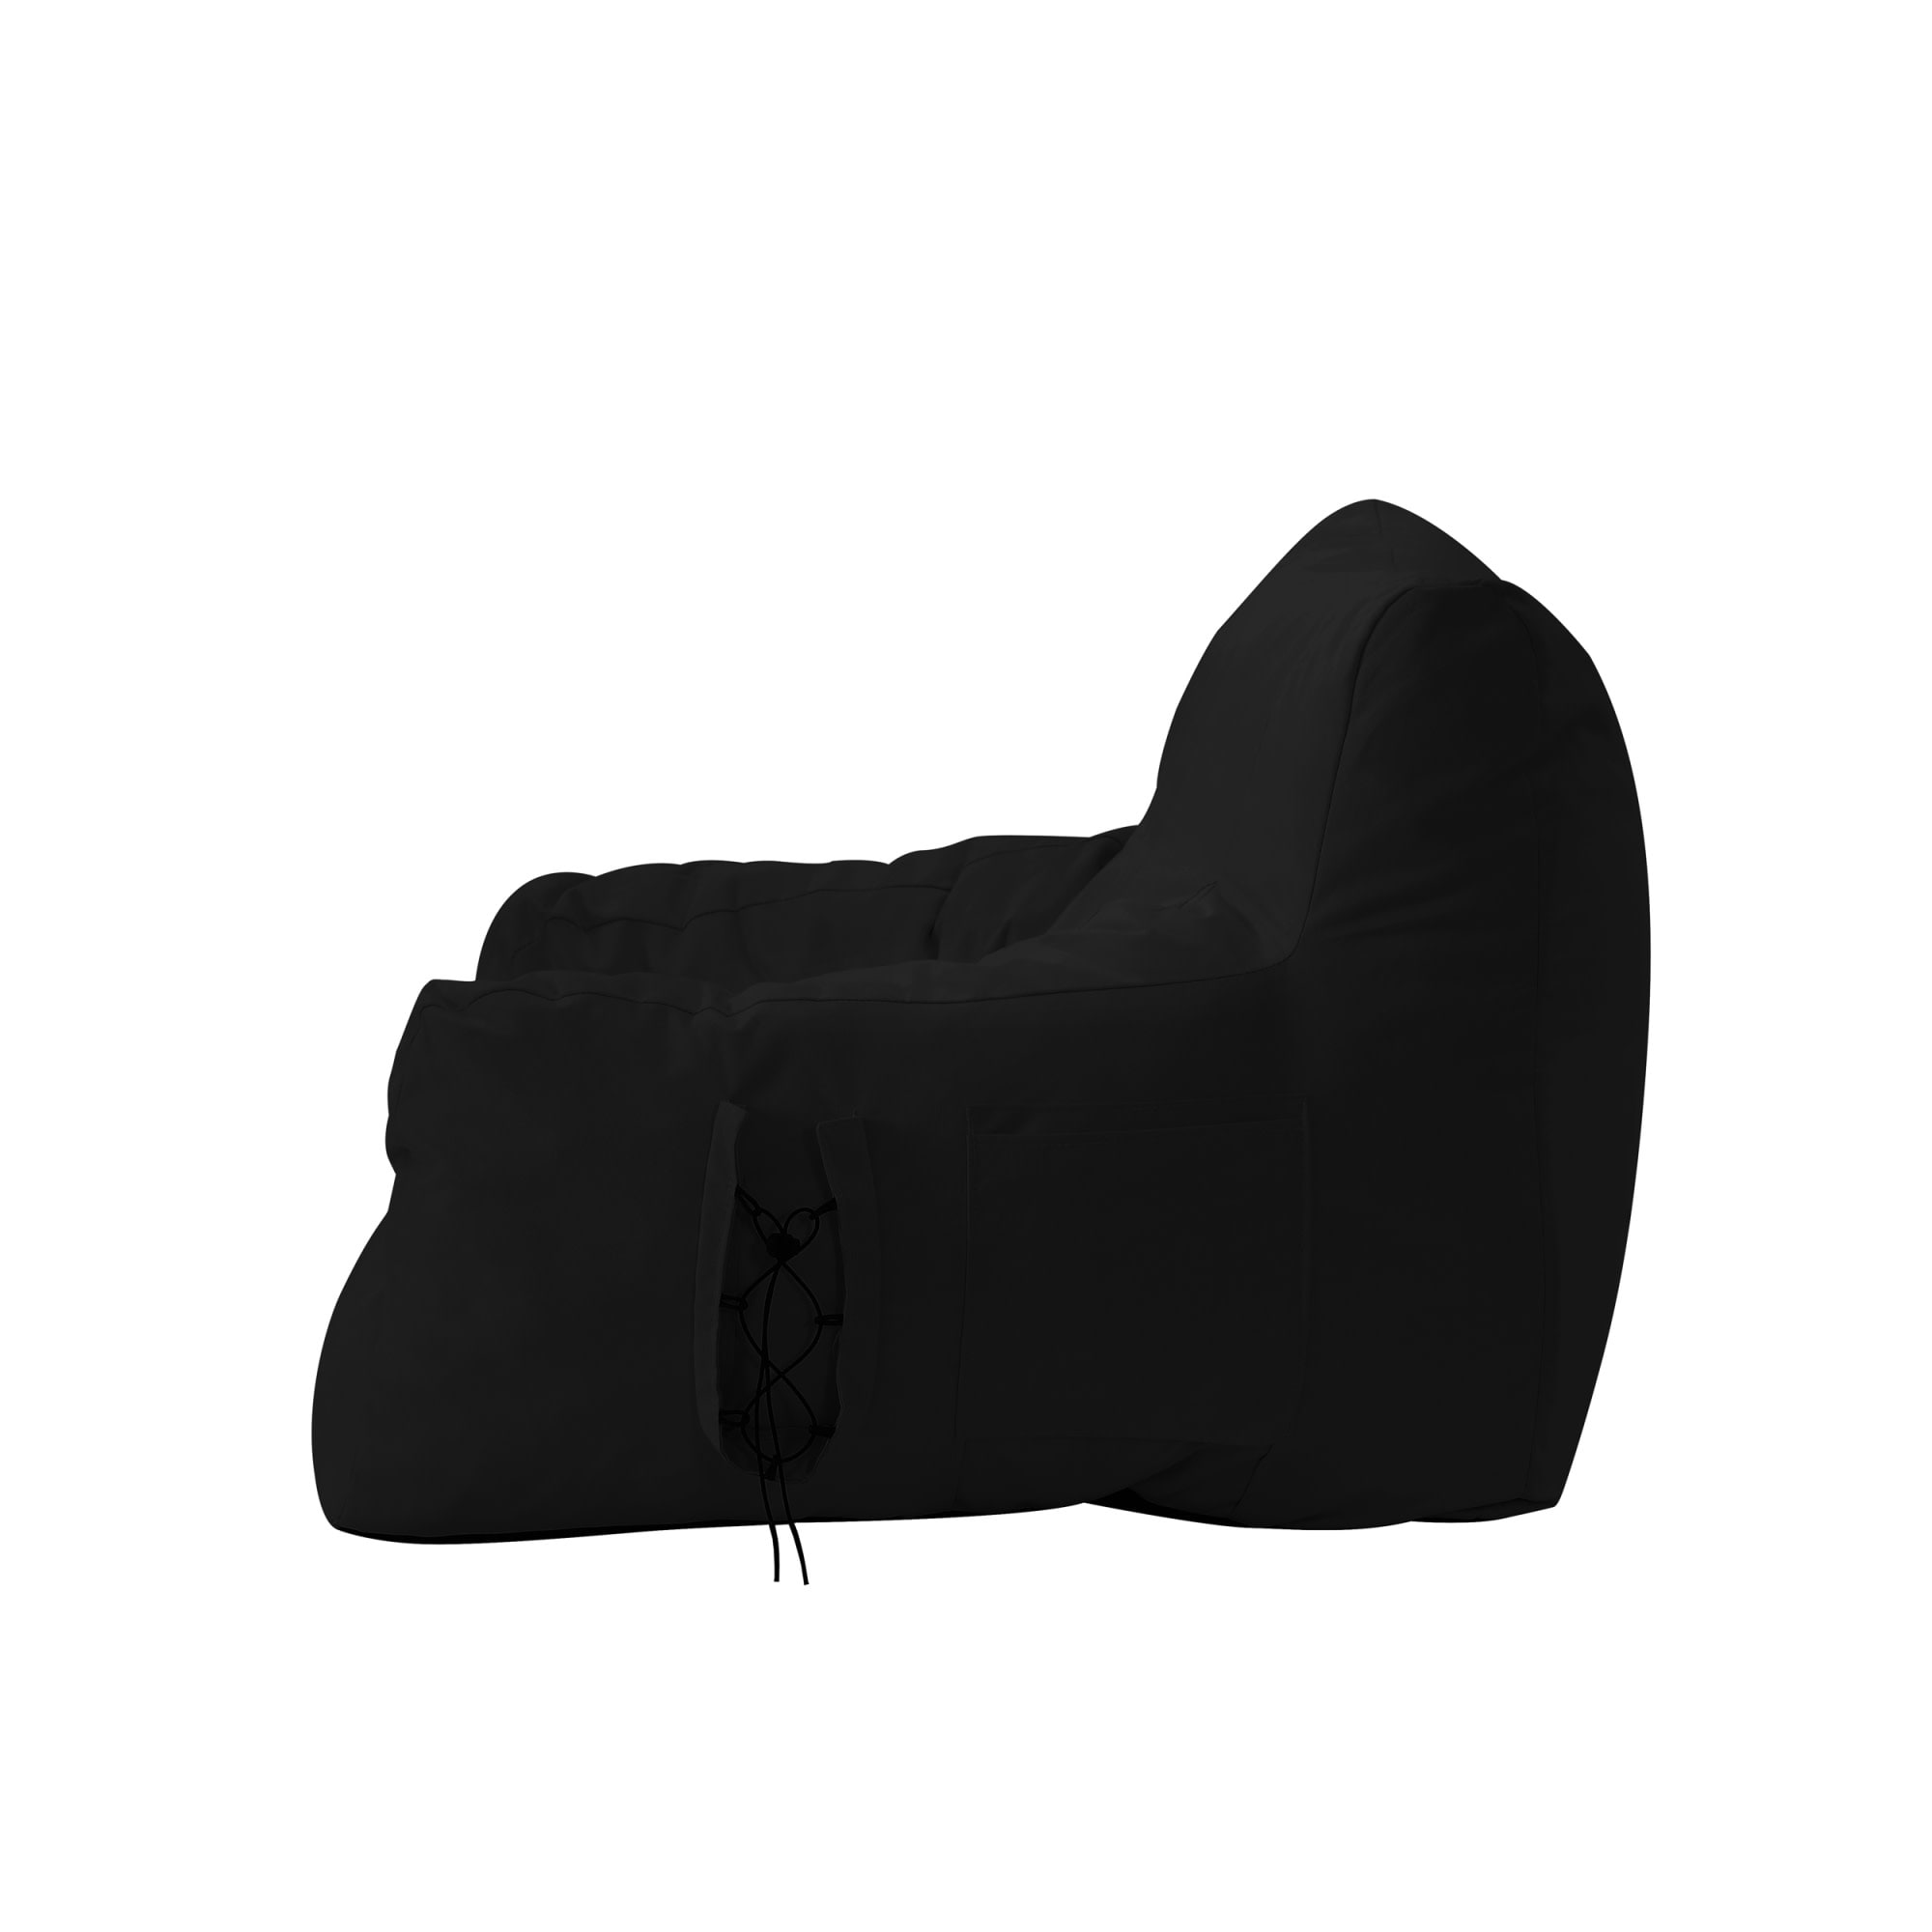 Big Bean Bag Lounger Adult size, Large Bean Bag Chair for Adults with Filler Included Latitude Run Fabric: Black, Size: 10 H x 58 W x 73 D